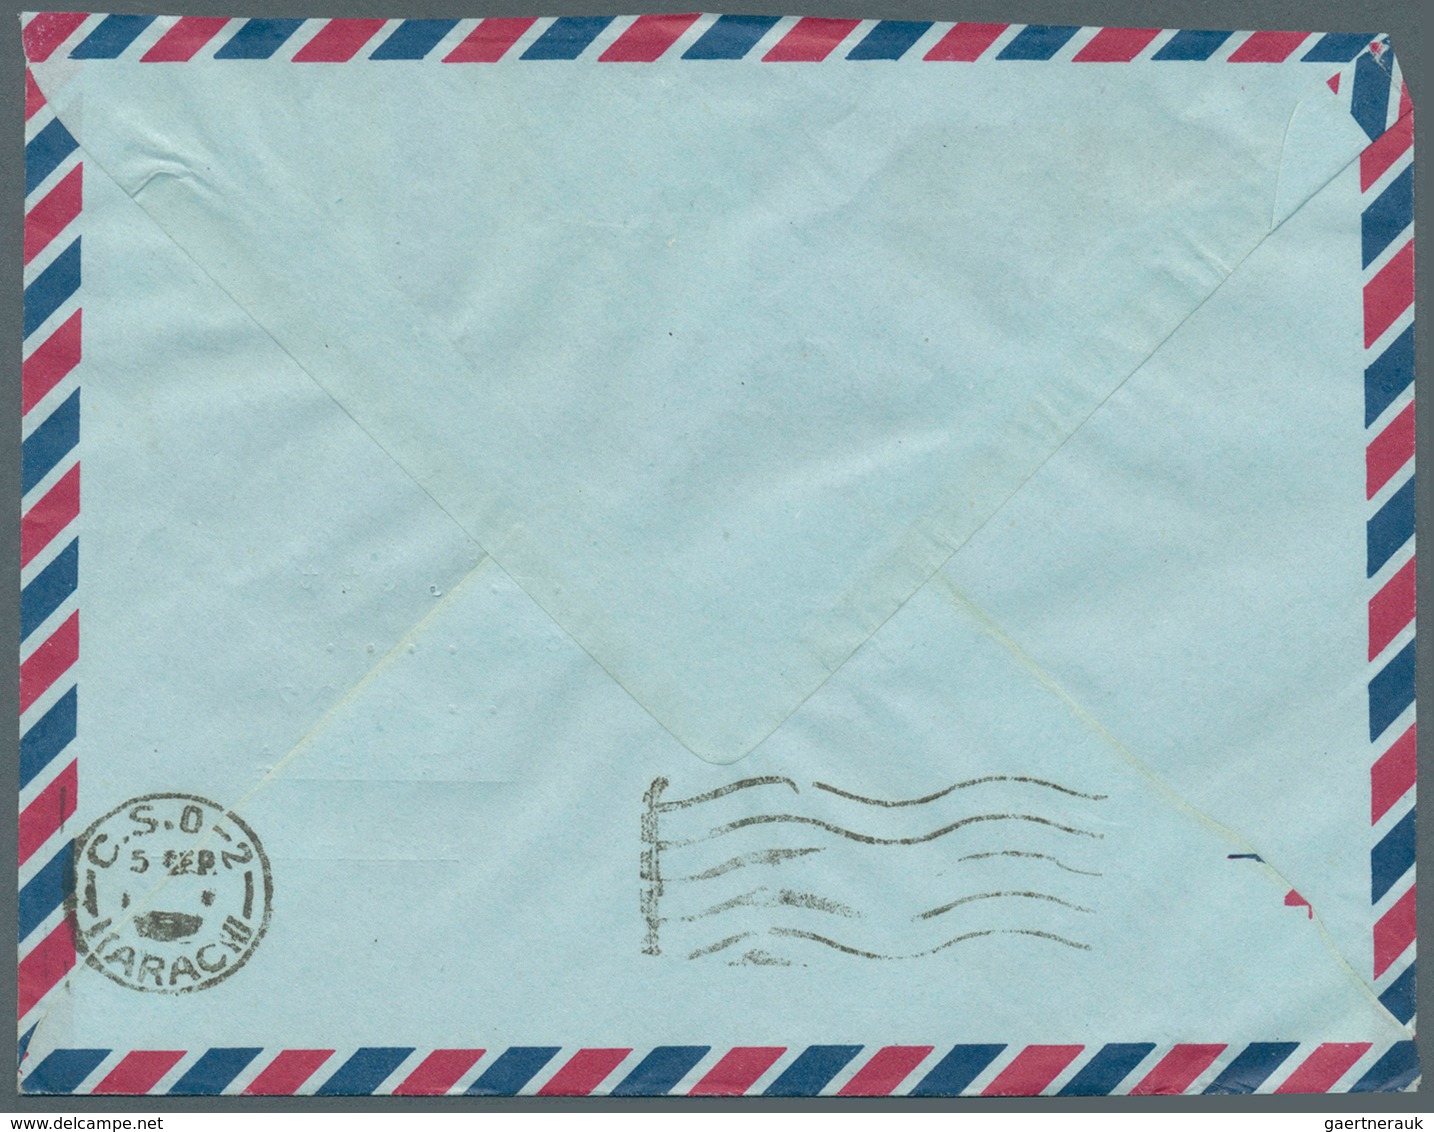 05132 Brunei - Stempel: WAKIL POS 1 and 2 (Postal Agency 1 and 2): 1981/85, four covers (two of each postm